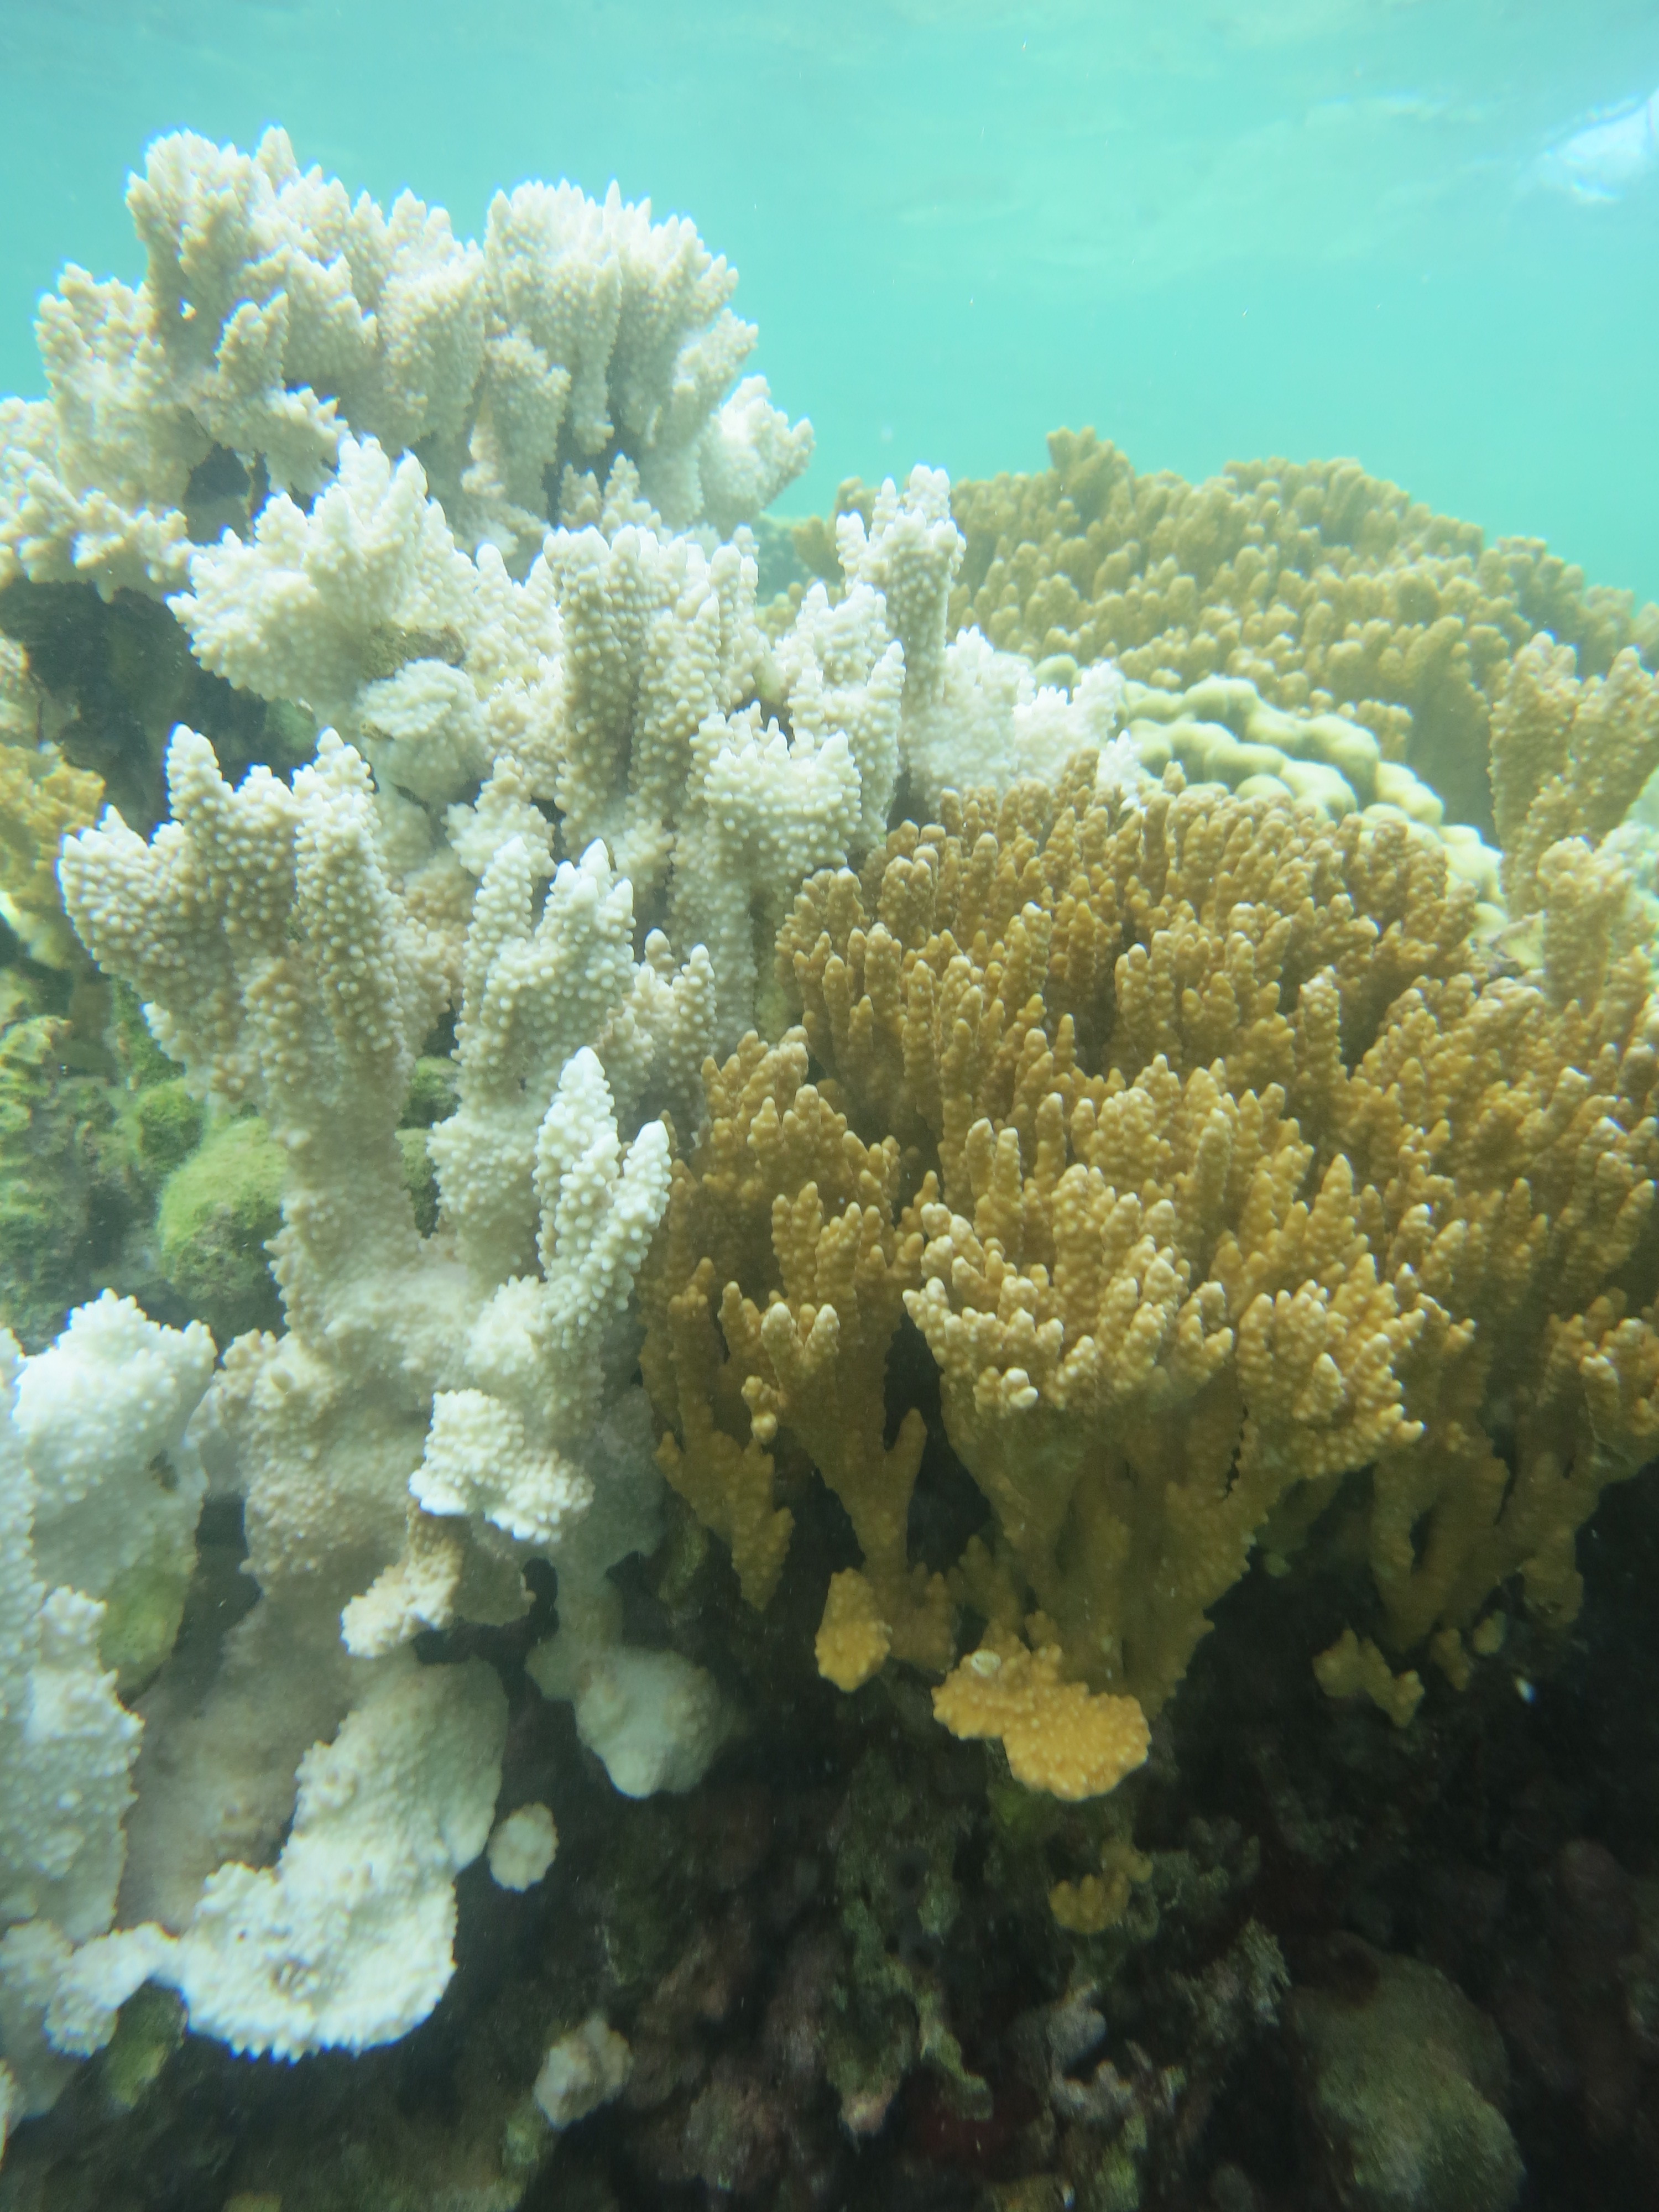 Coral reef in Hawaii where some corals are bleached white and others are brown